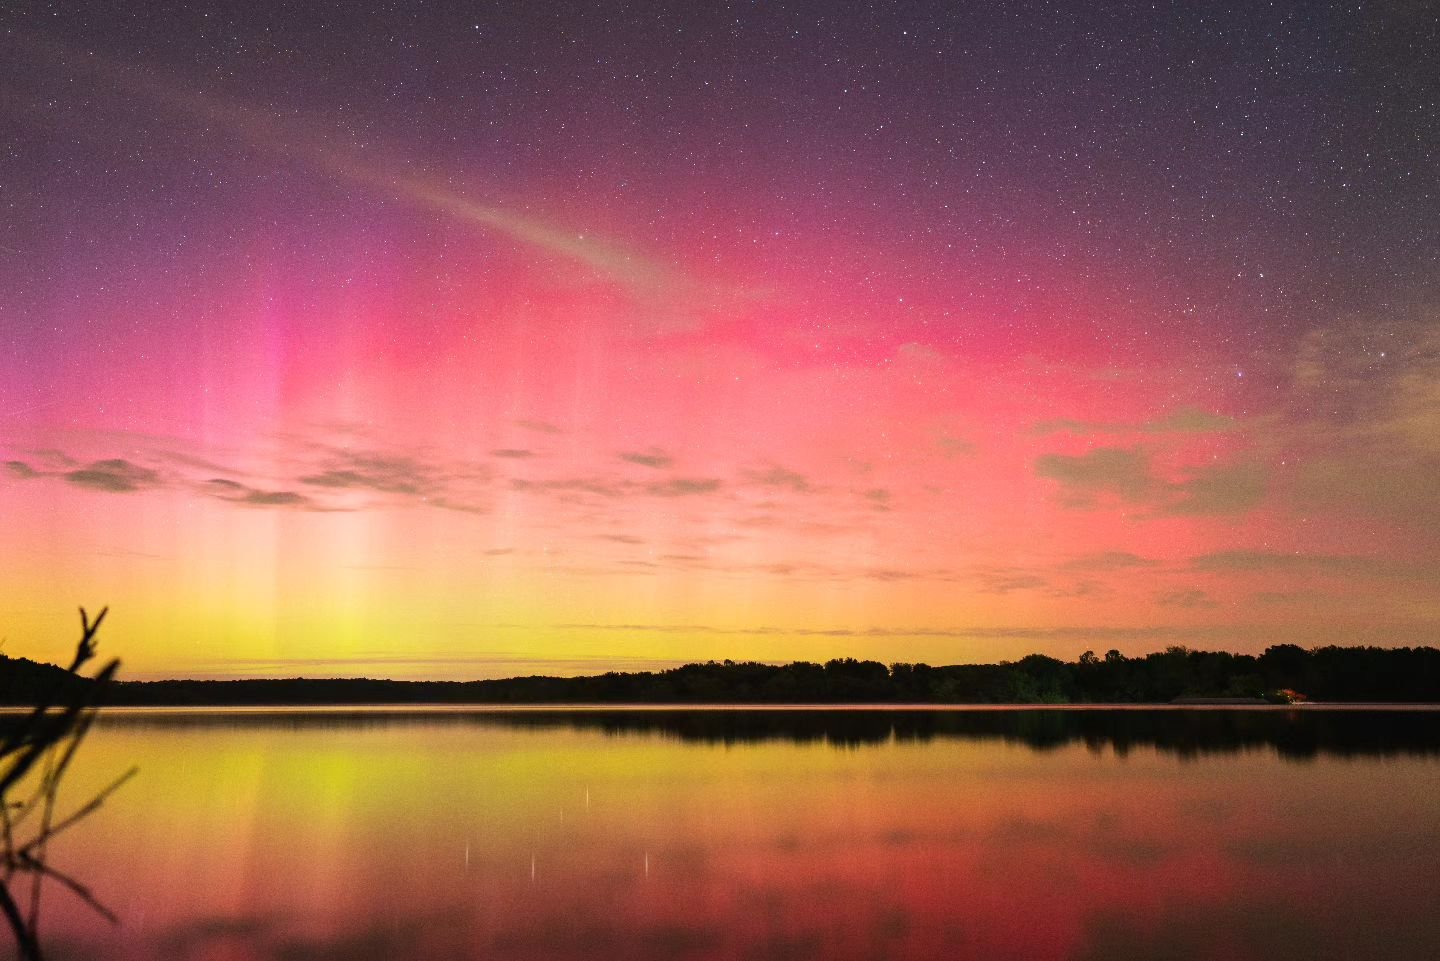 Seeing the northern lights over the midwest last weekend was one of the coolest experiences ever.